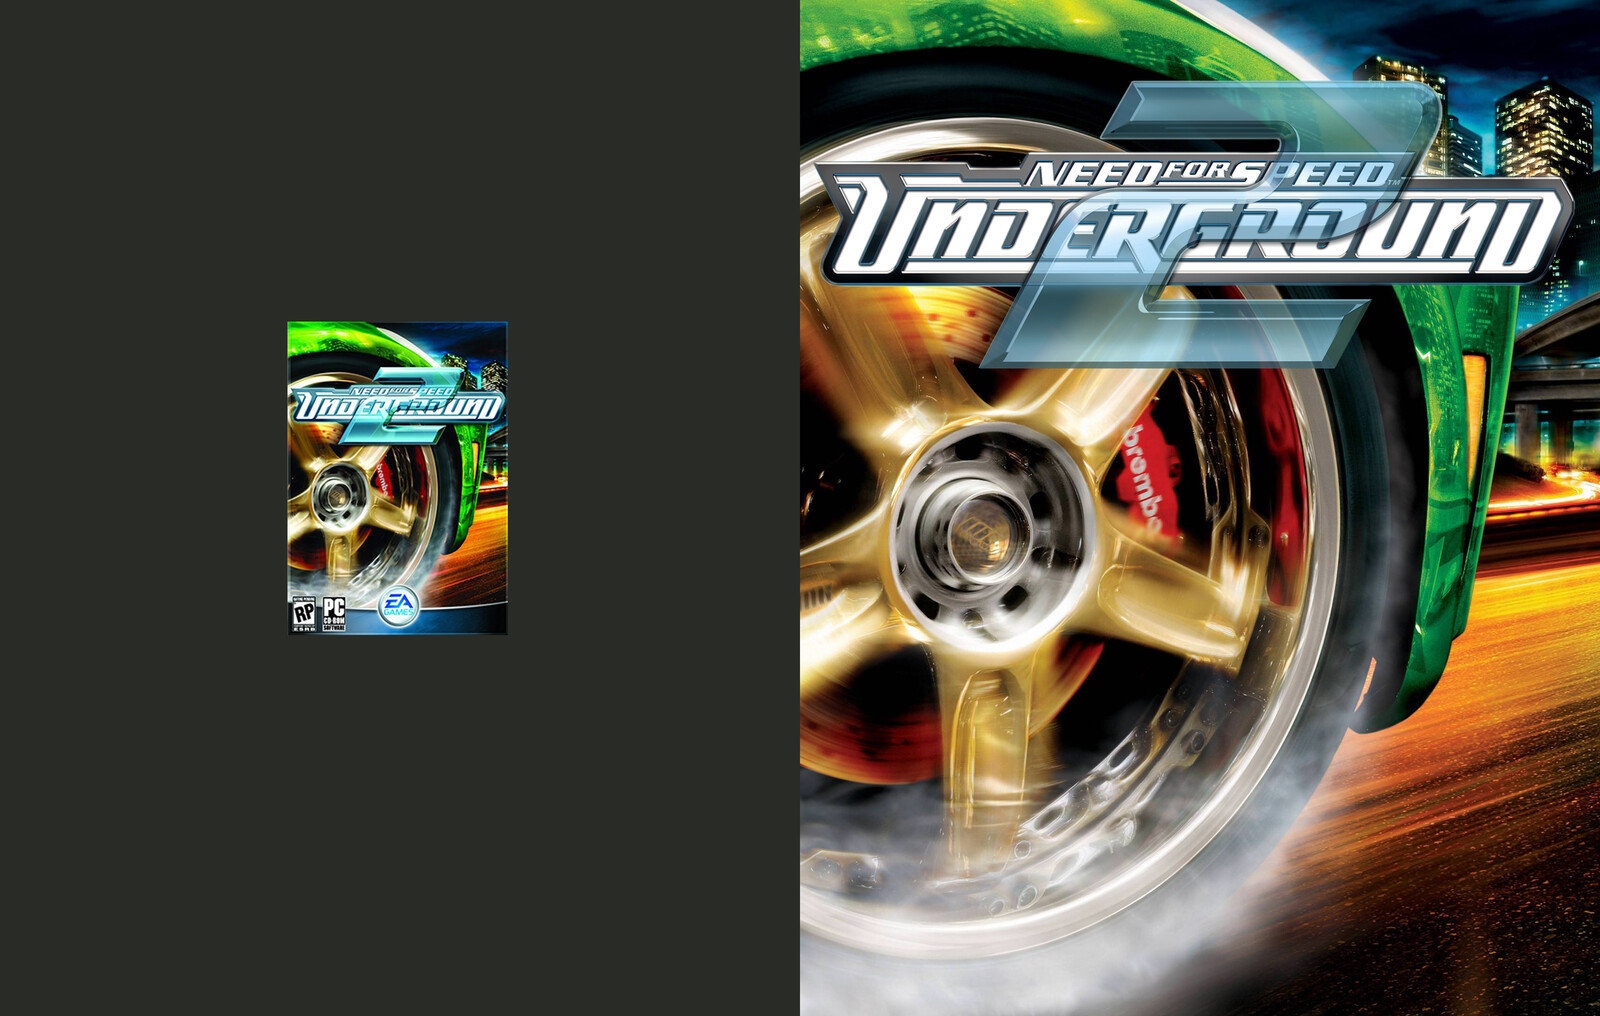 Need for Speed: Underground 2 (Original Scan vs. Poster format)